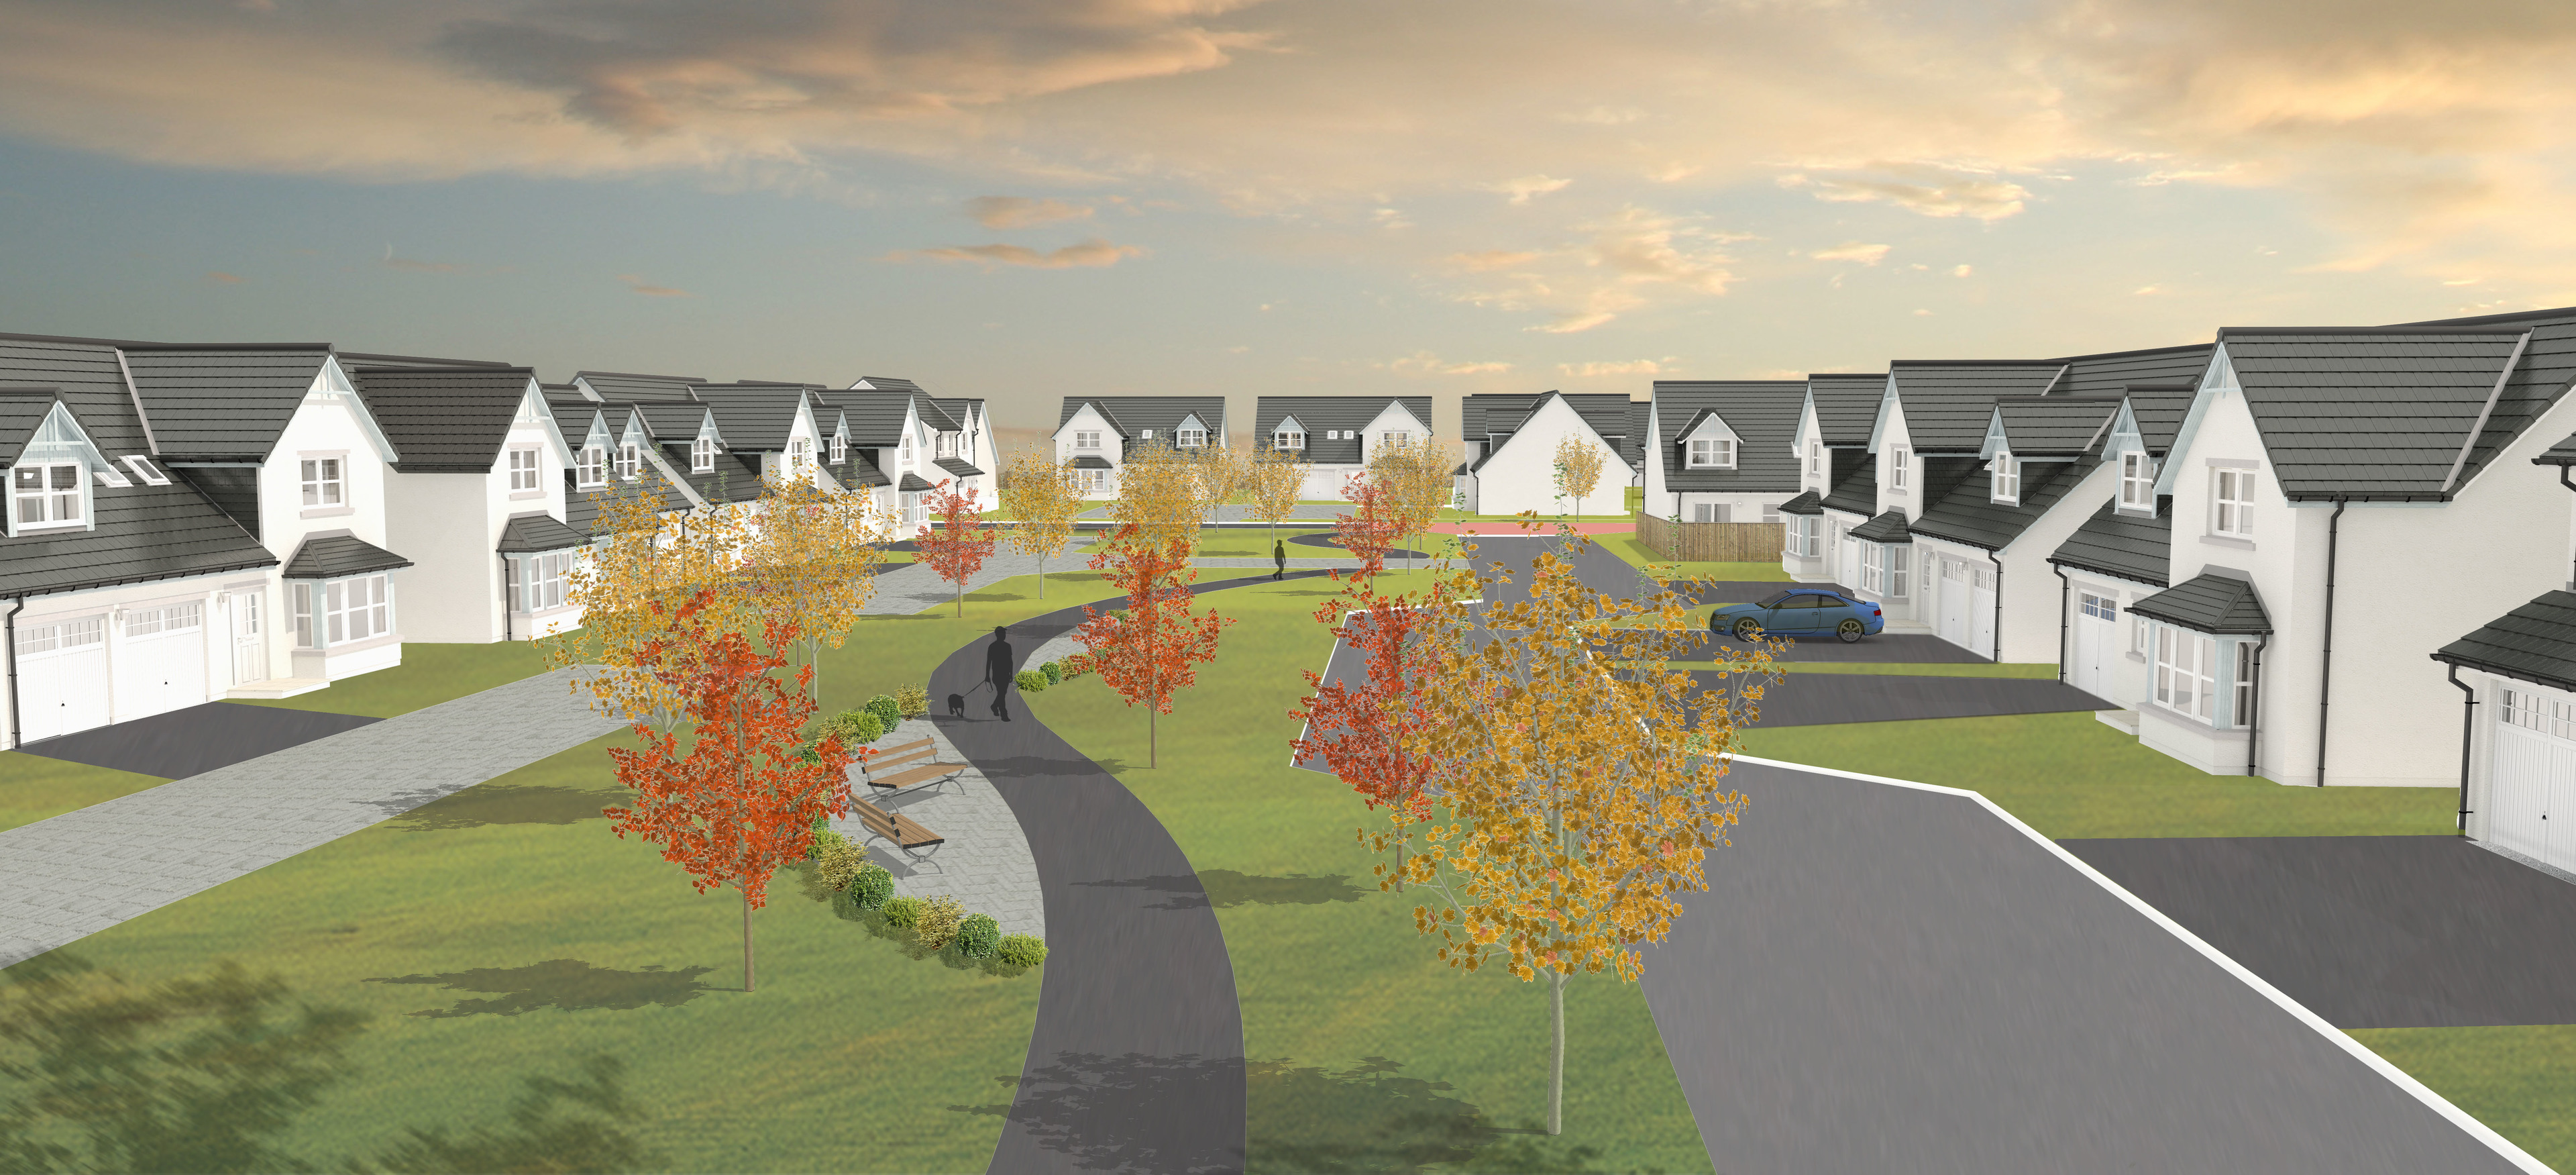 An impression of how the Linlathen development might look.